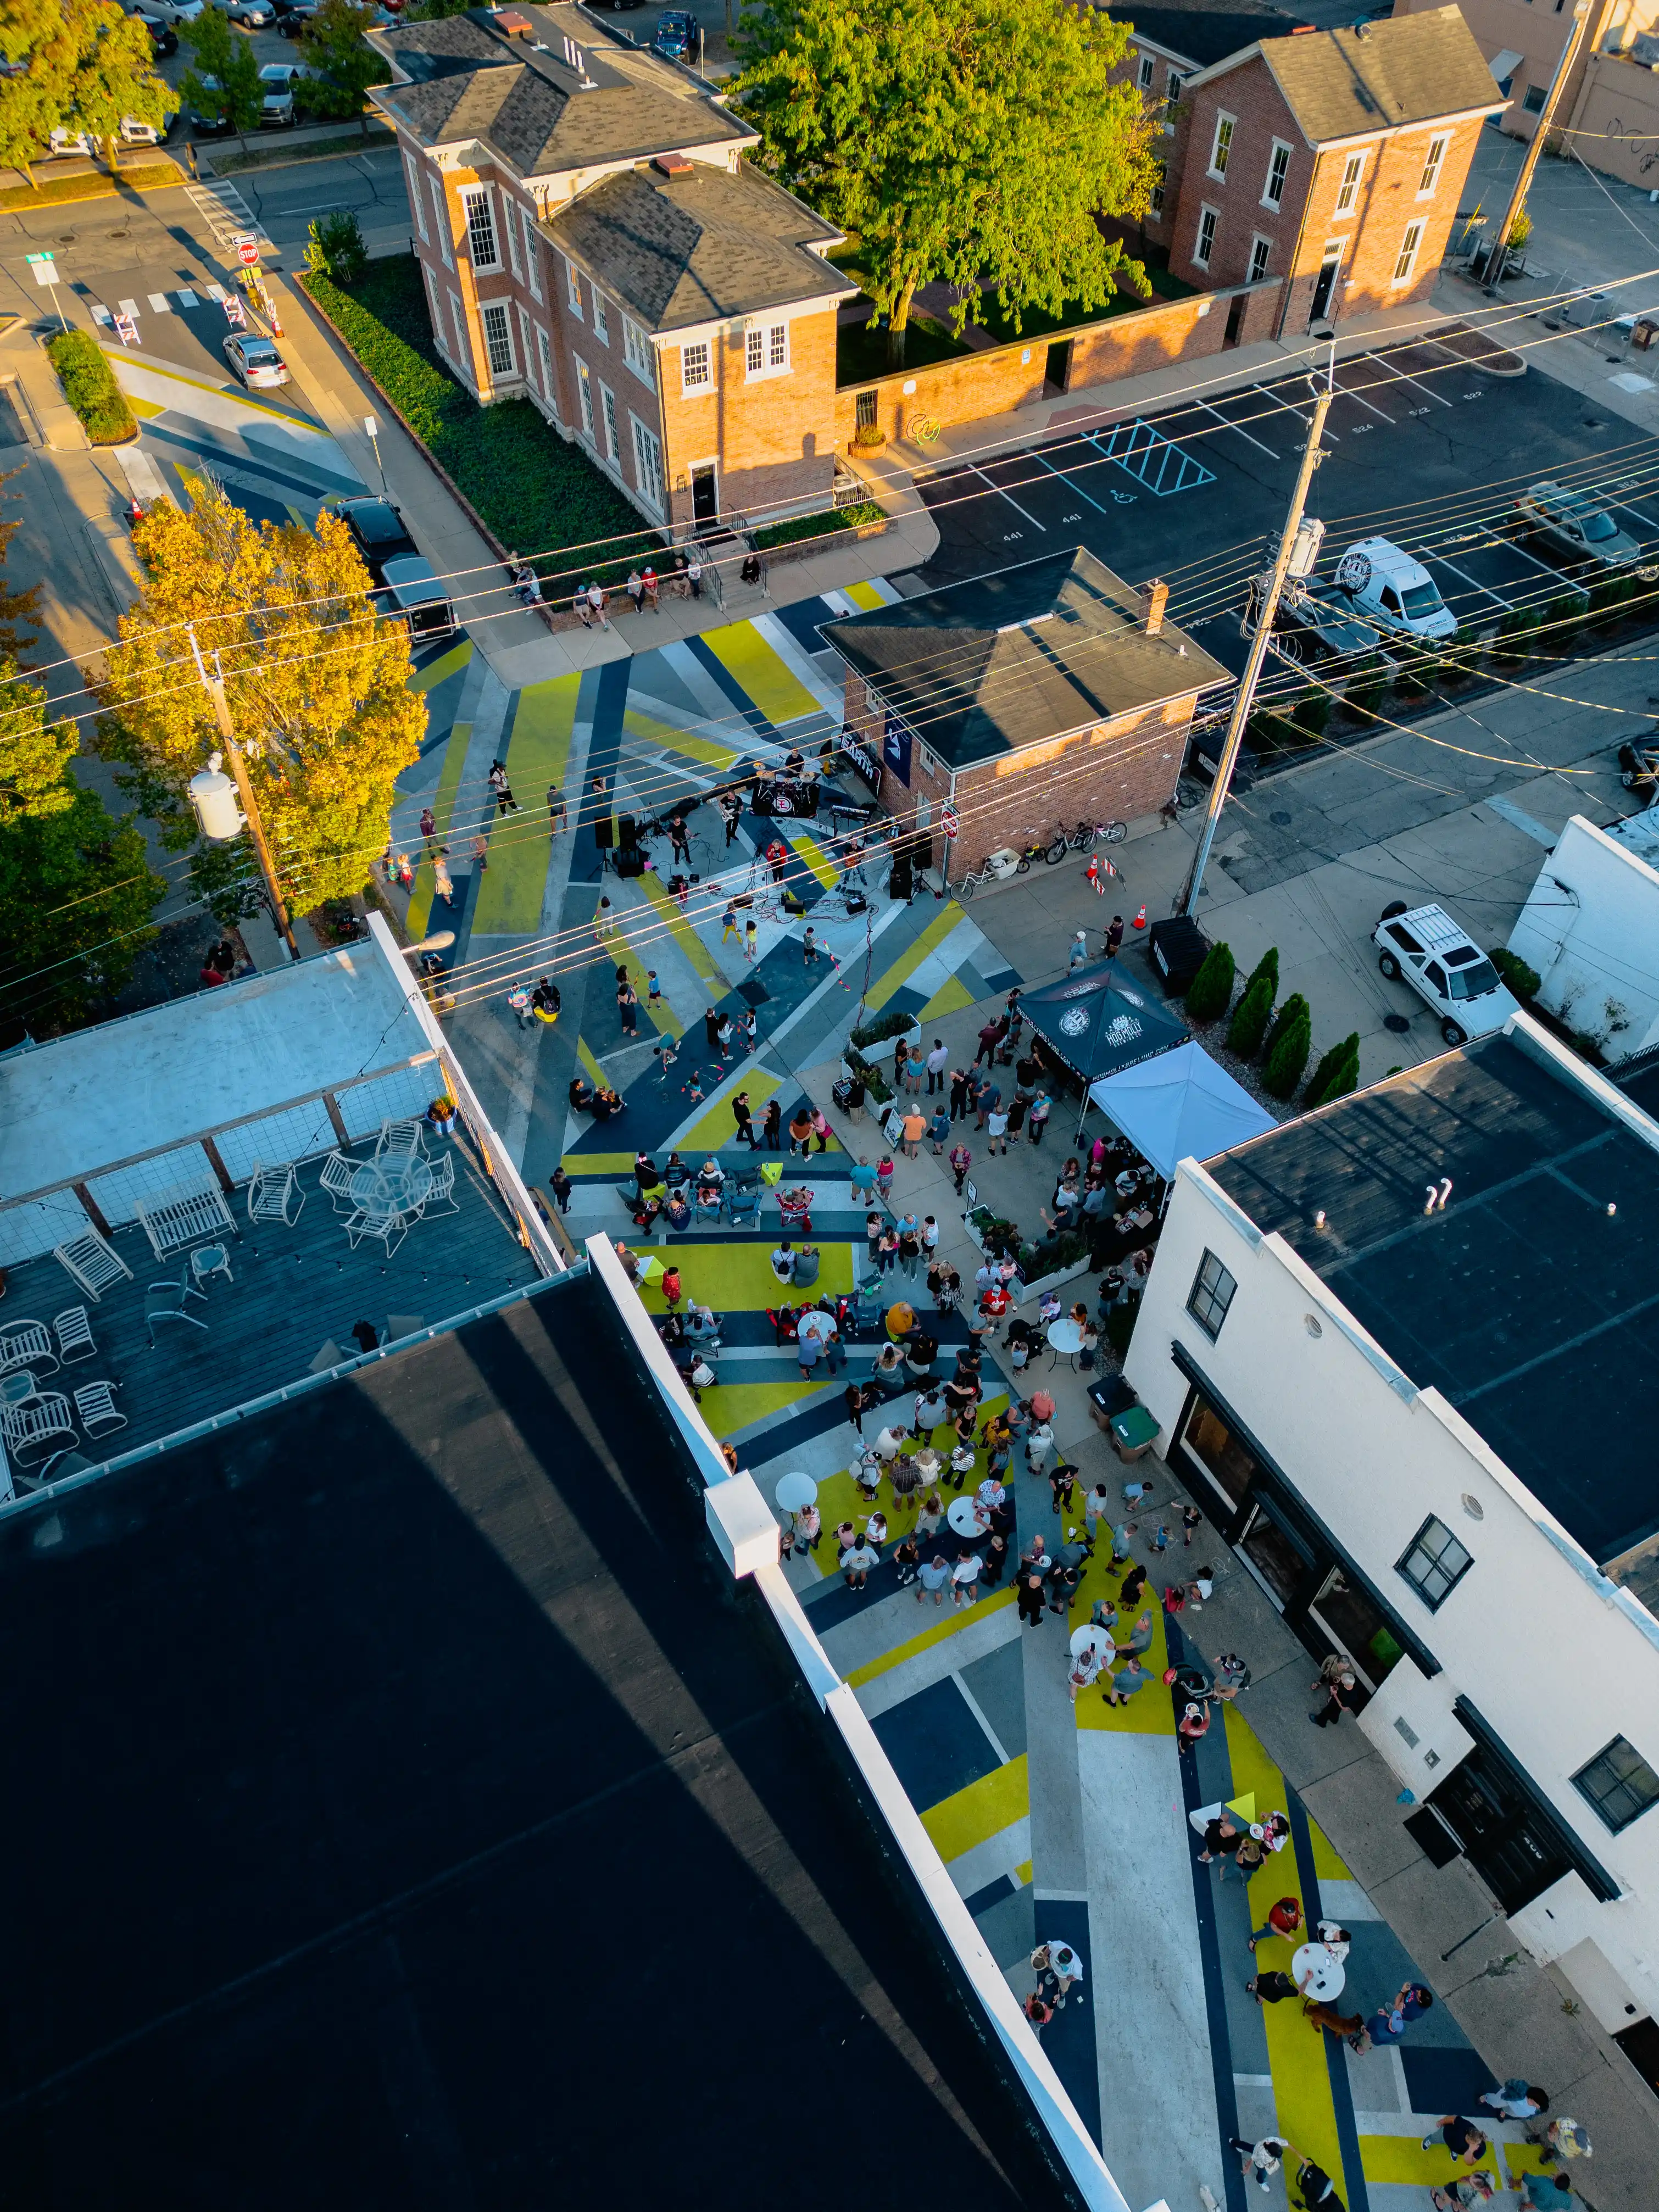 Aerial view of a bustling street with pedestrians, vehicles, and surrounding buildings in an urban environment at dusk.